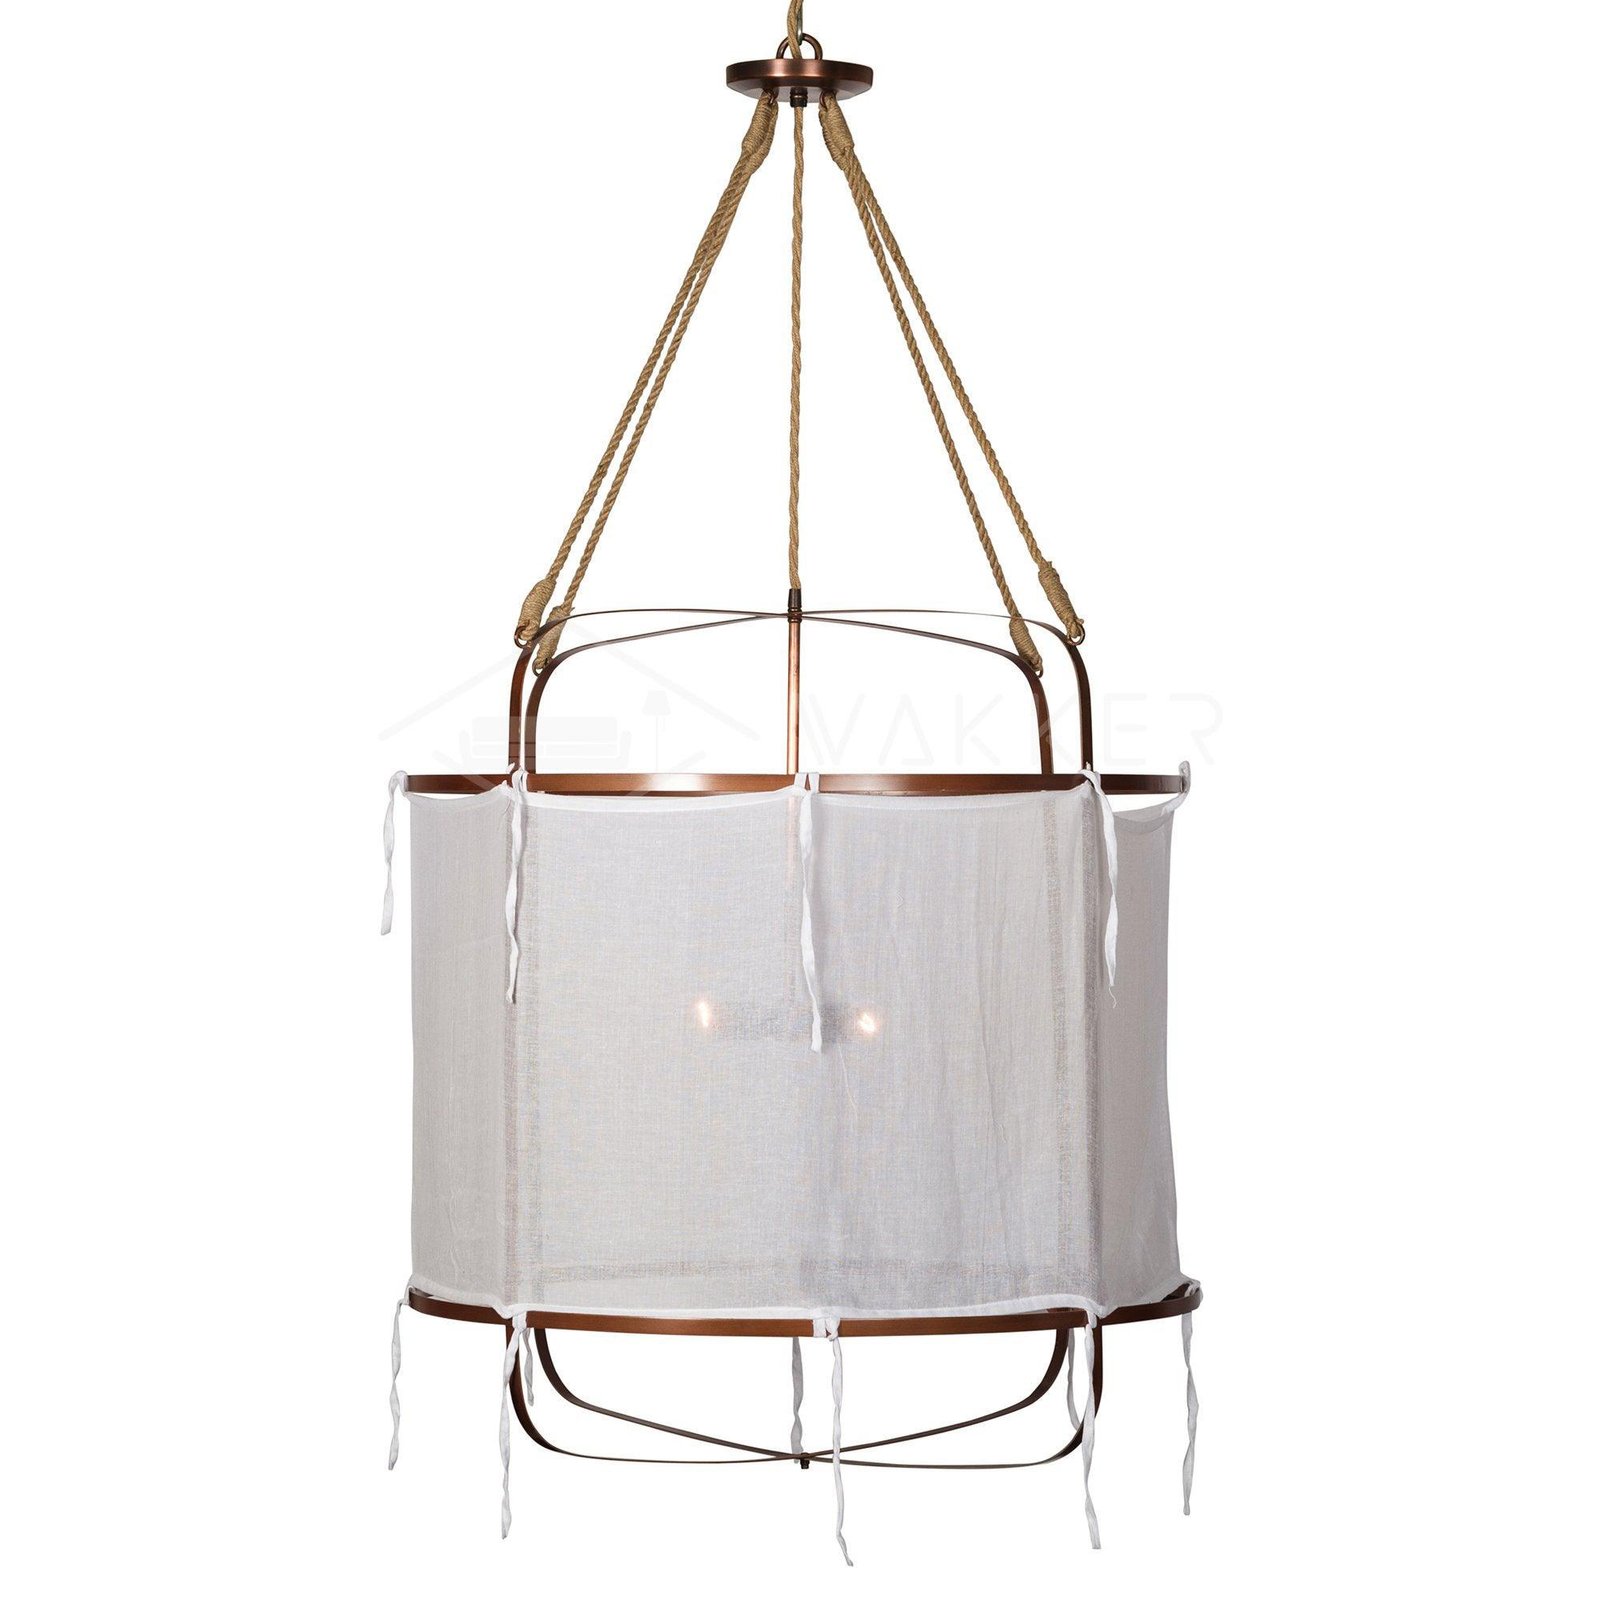 Provence Linen Pendant Light in Copper or White, Diameter 23.6 inches x Height 23.6 inches (or Diameter 60cm x Height 60cm)